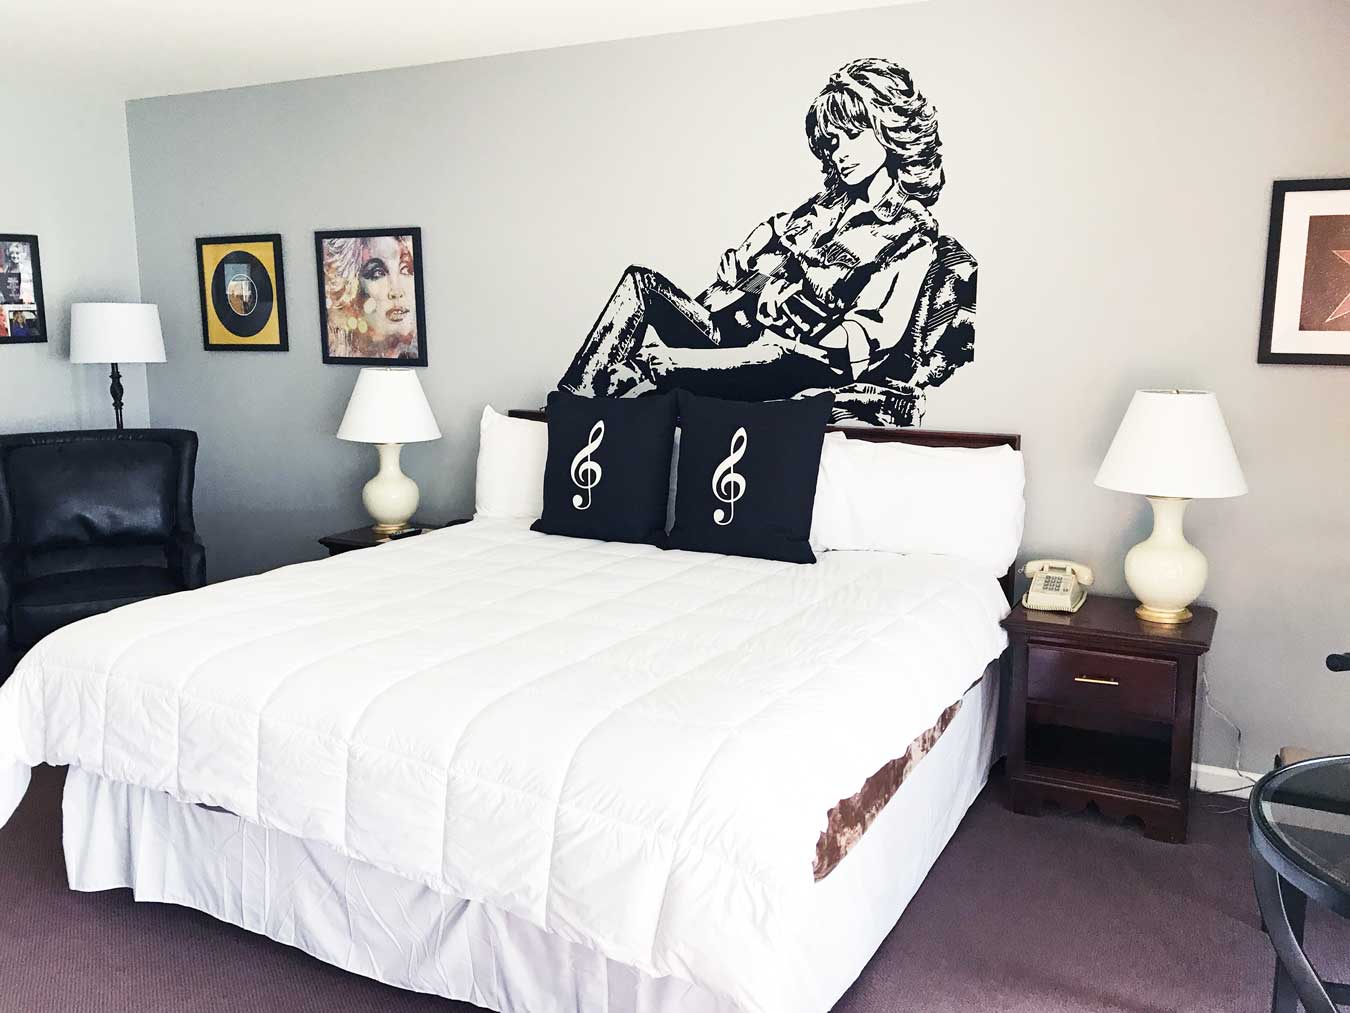 Dolly Parton Themed Room At Don Hall's Guesthouse in Fort Wayne, Indiana - What a fun place to stay! // The Weekend Getaway You've Overlooked: Visit Fort Wayne, Indiana [via Wading in Big Shoes] // Located equidistantly from Chicago, Cincinnati, and Detroit, Fort Wayne, Indiana is a fun midwest destination that captures a perfect blend of city, nature, and local flavors! See what I experienced on my trip to Fort Wayne and learn what makes Indiana's second-largest city the perfect spot for a weekend getaway.